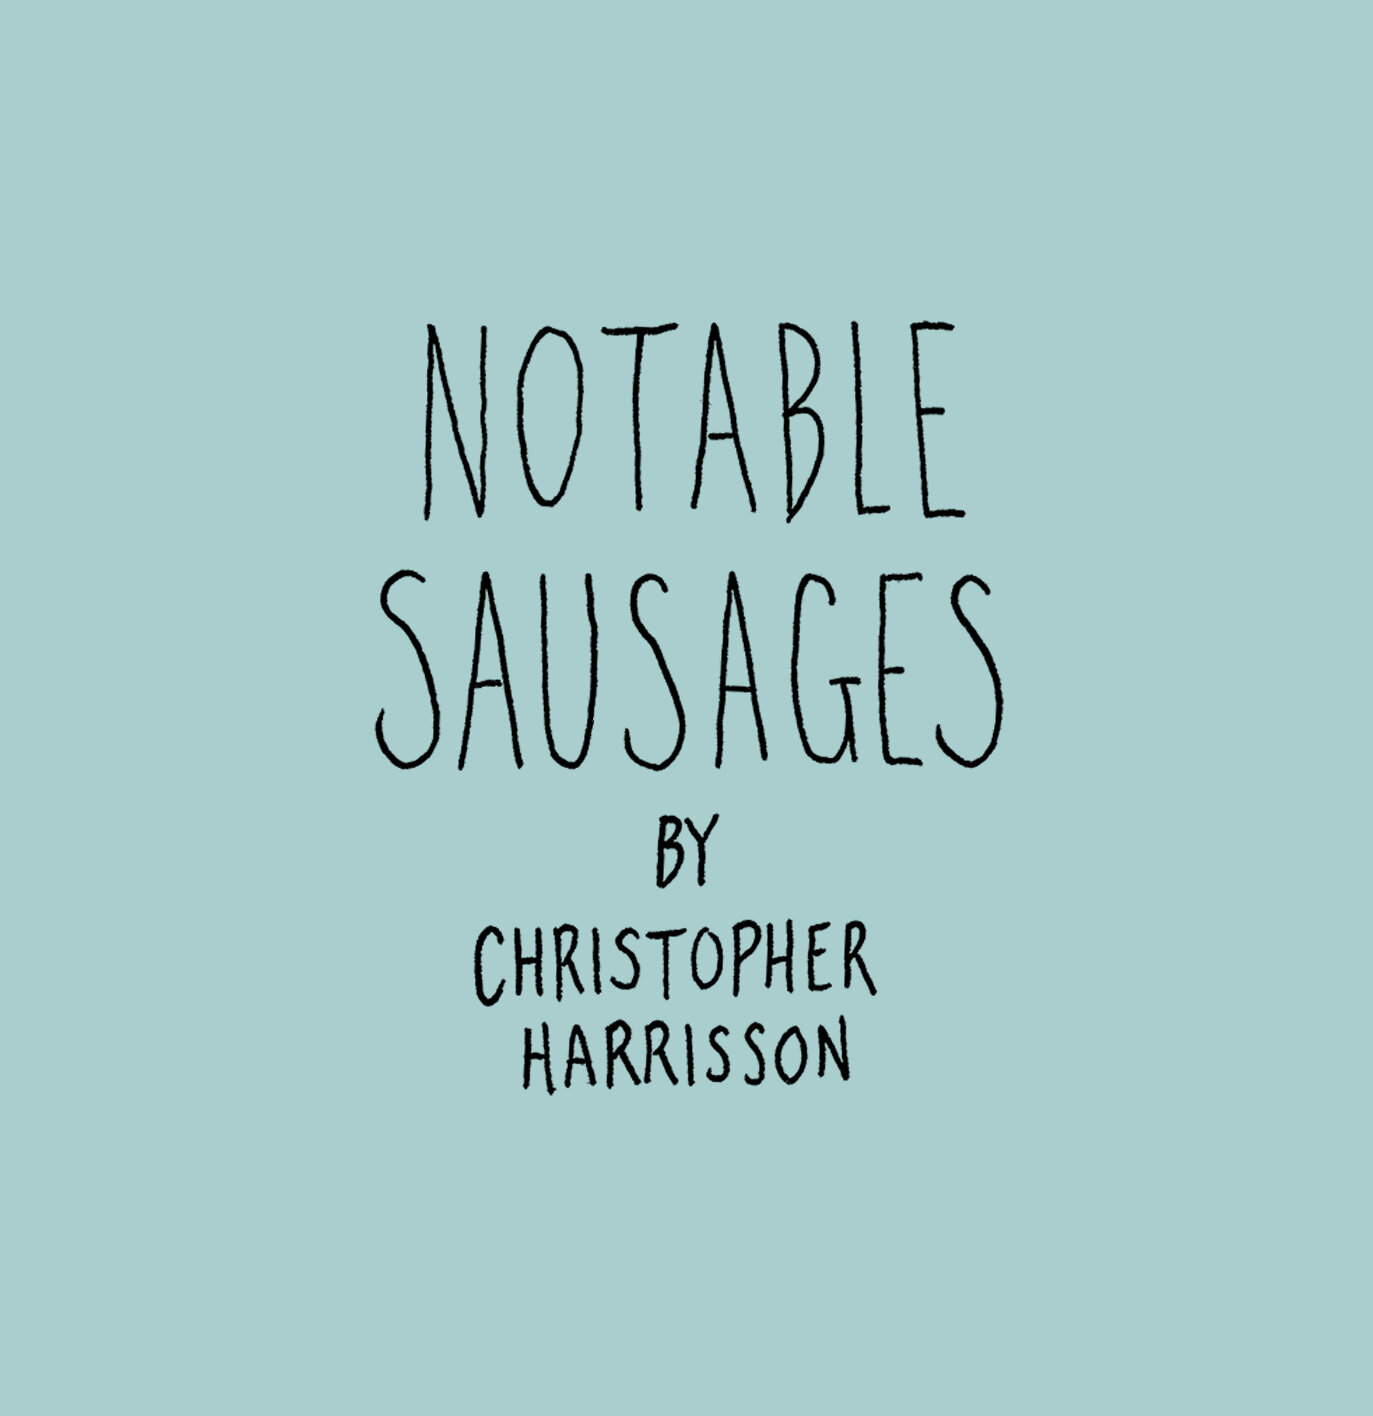 Notable Sausages